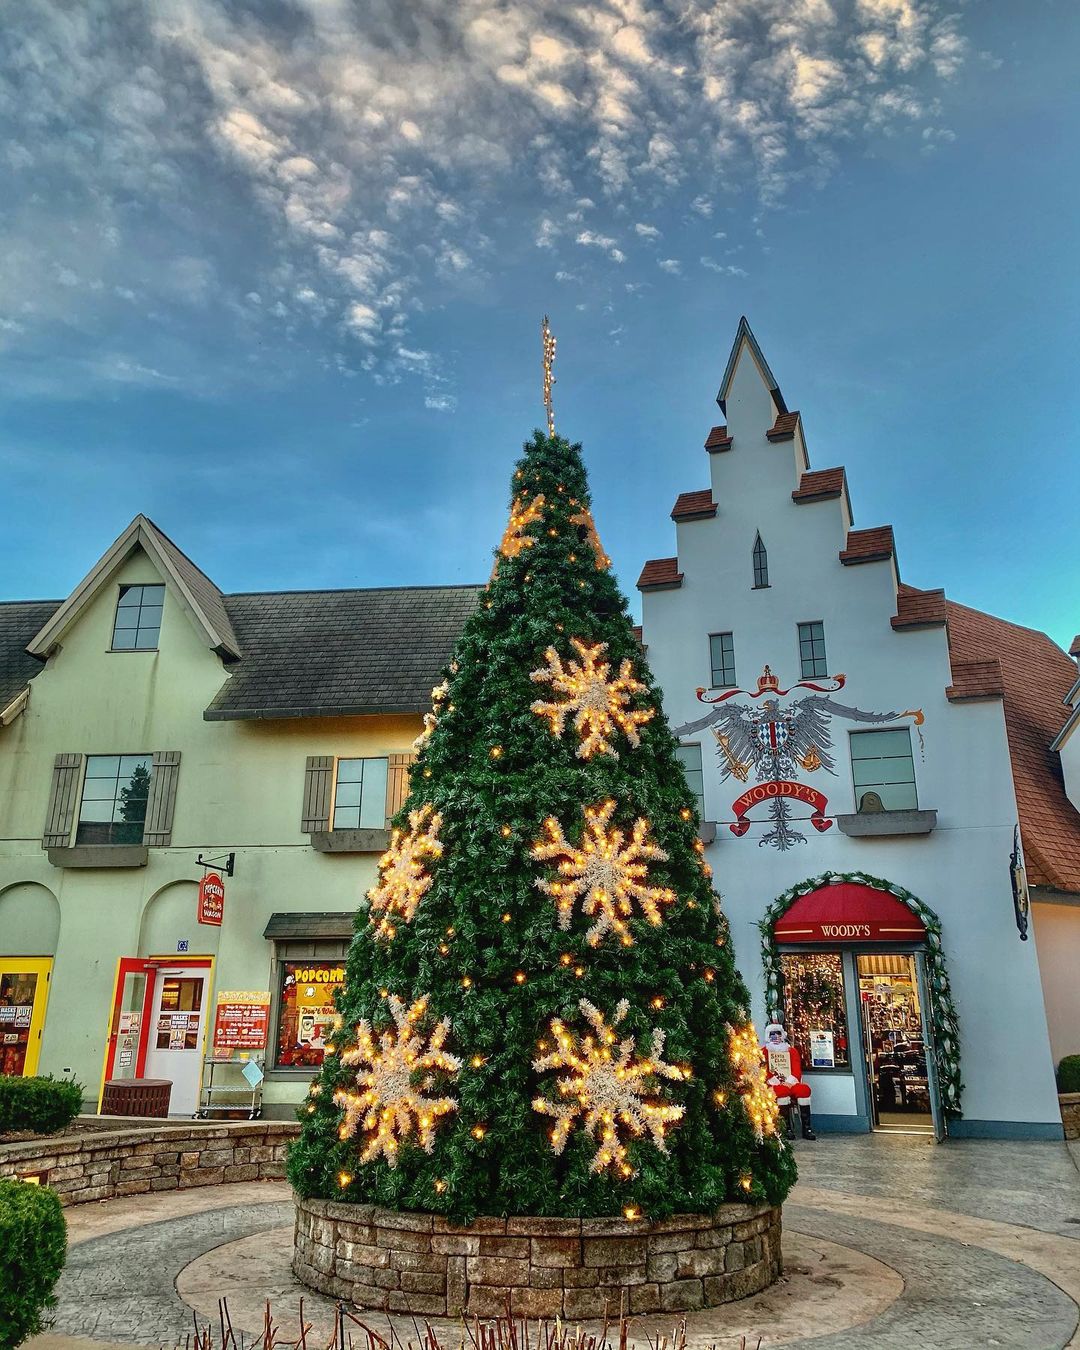 Christmas Tree in the Center of Little Bavaria in Frankenmuth, MI. Photo by Instagram user @mimichiganphotos